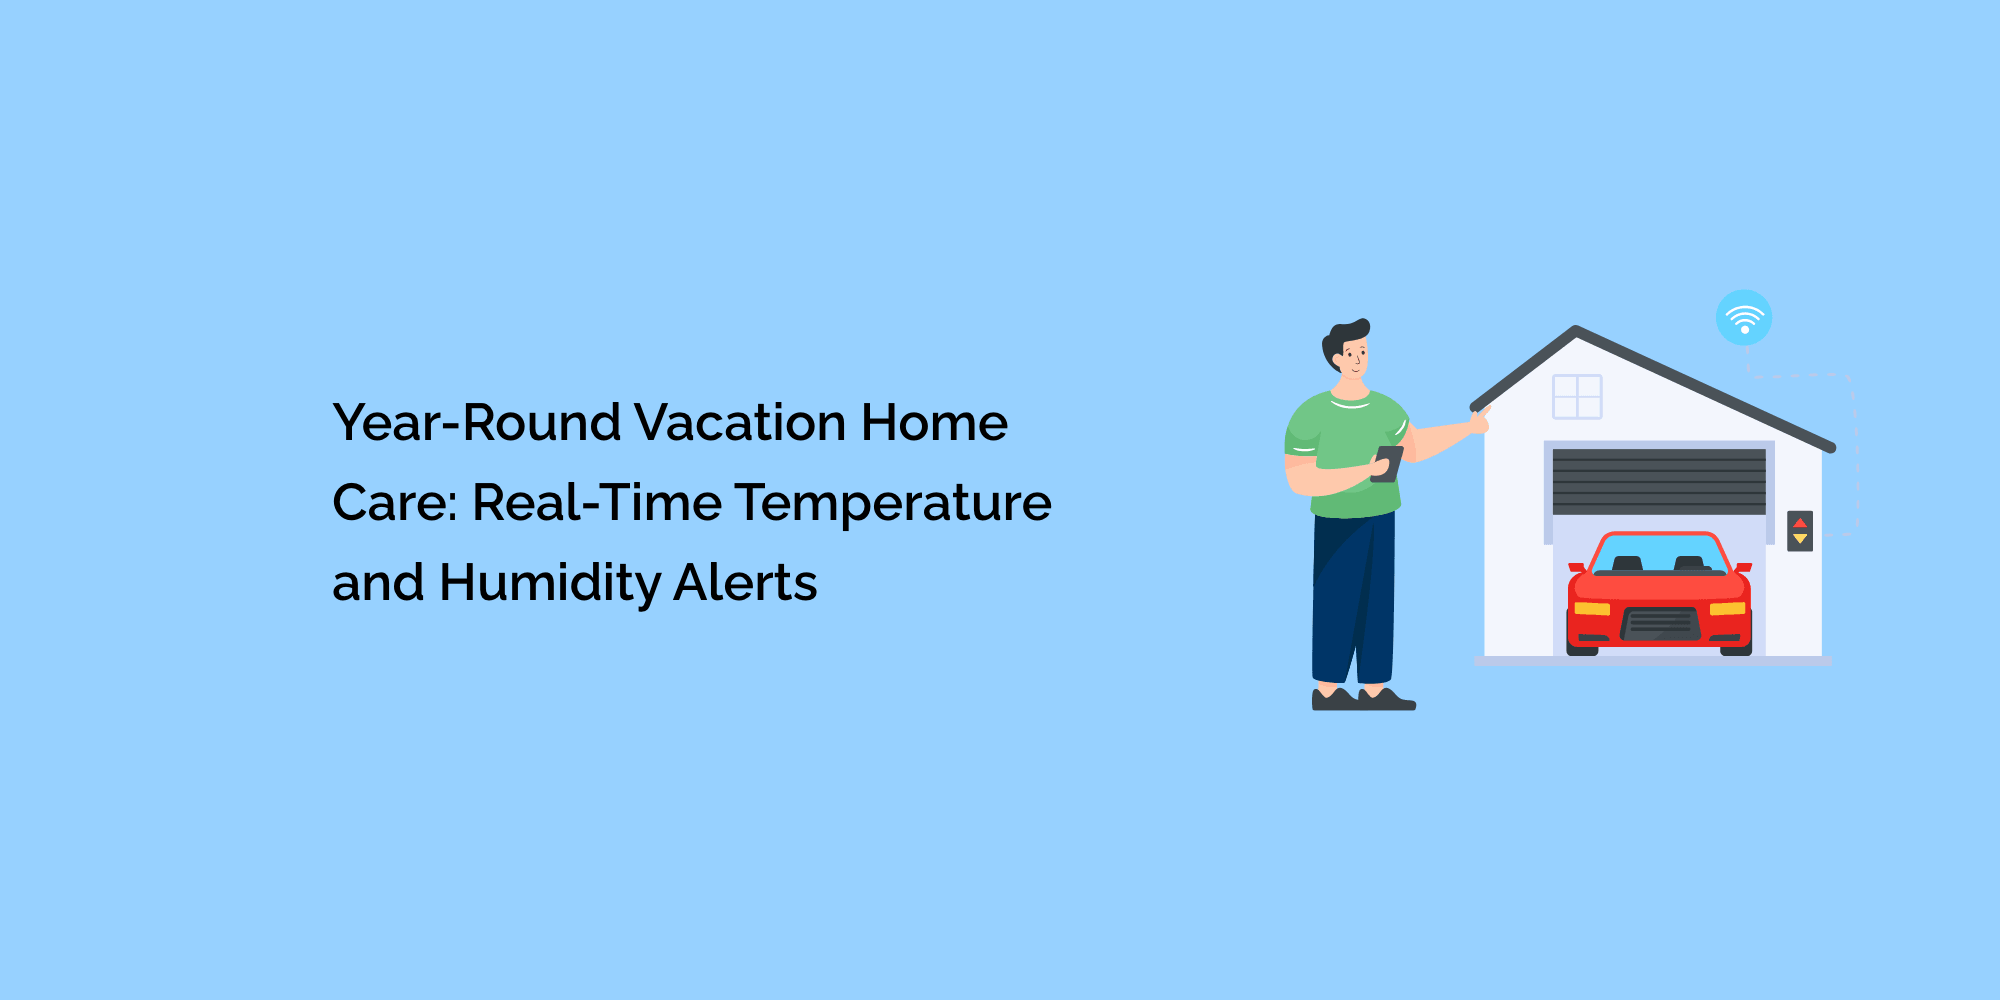 Year-Round Vacation Home Care: Real-Time Temperature and Humidity Alerts